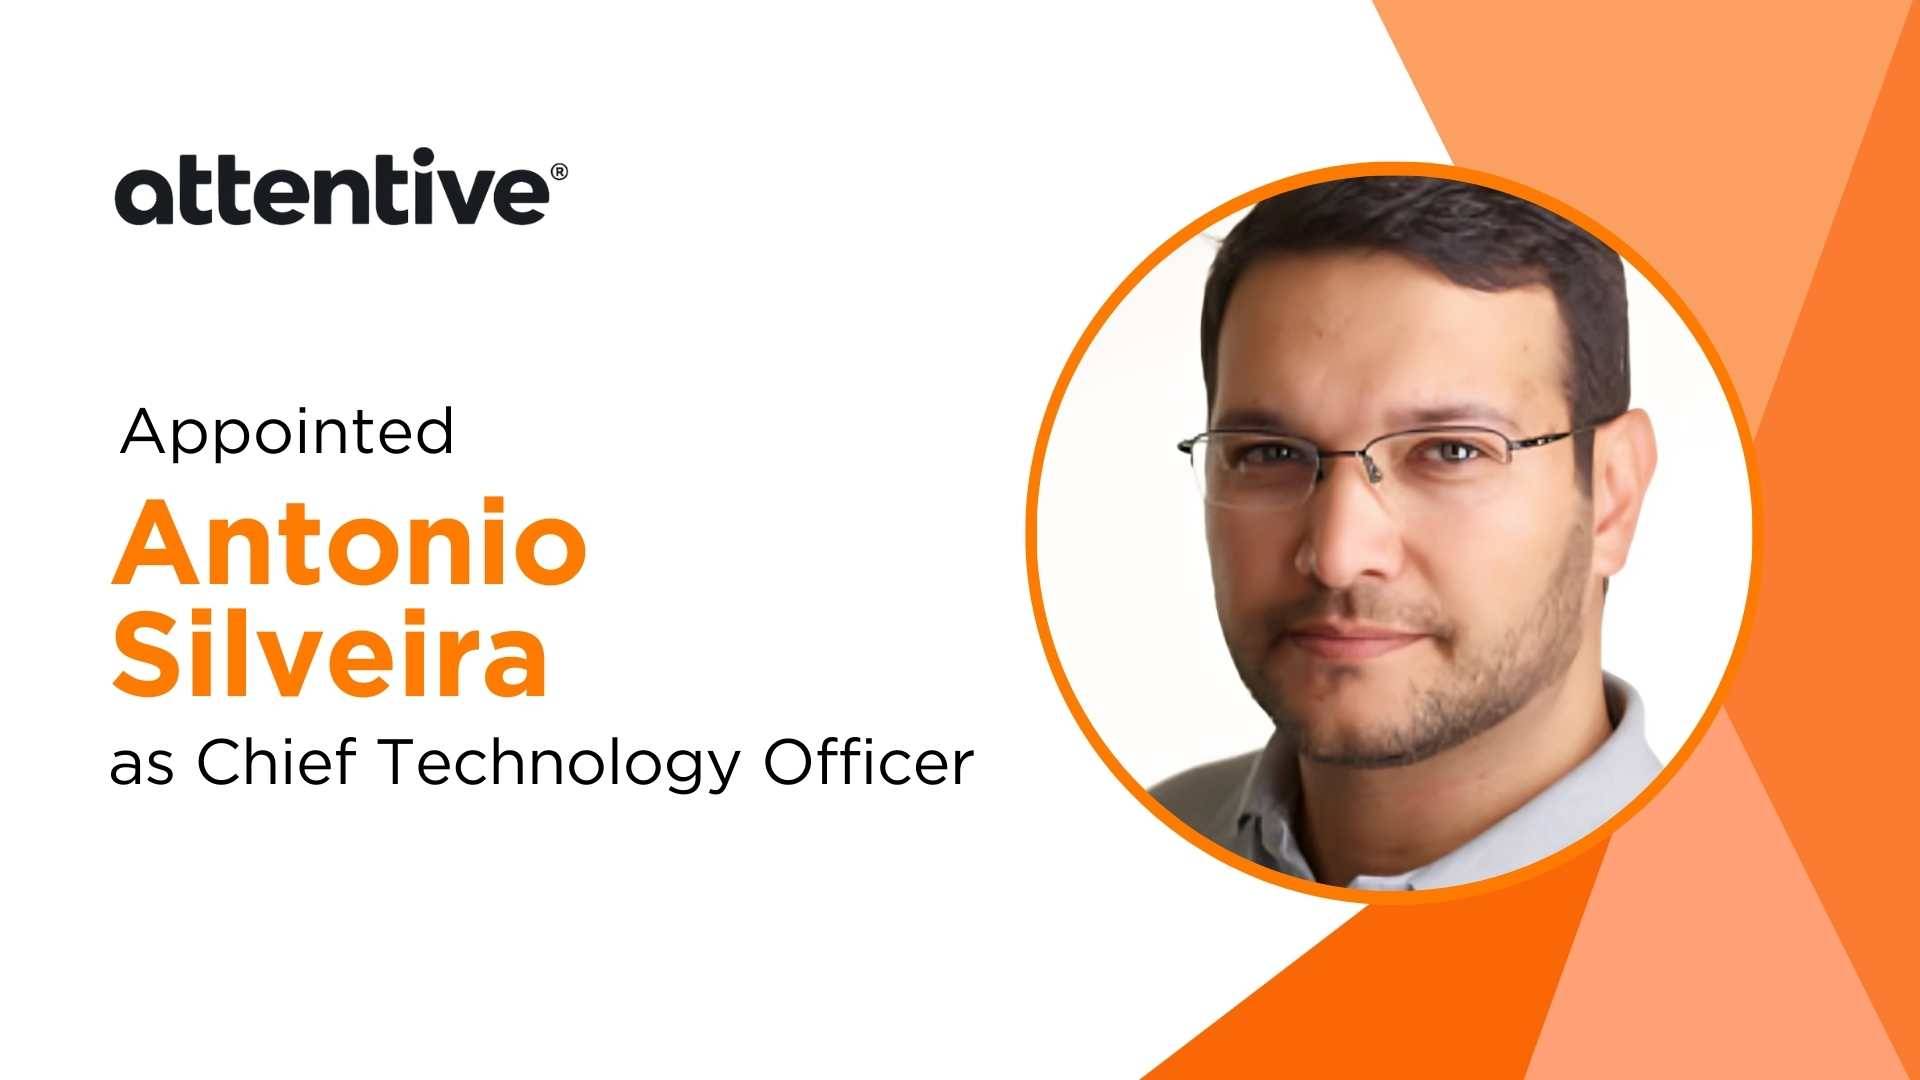 Antonio Silveira Joins Attentive as Chief Technology Officer